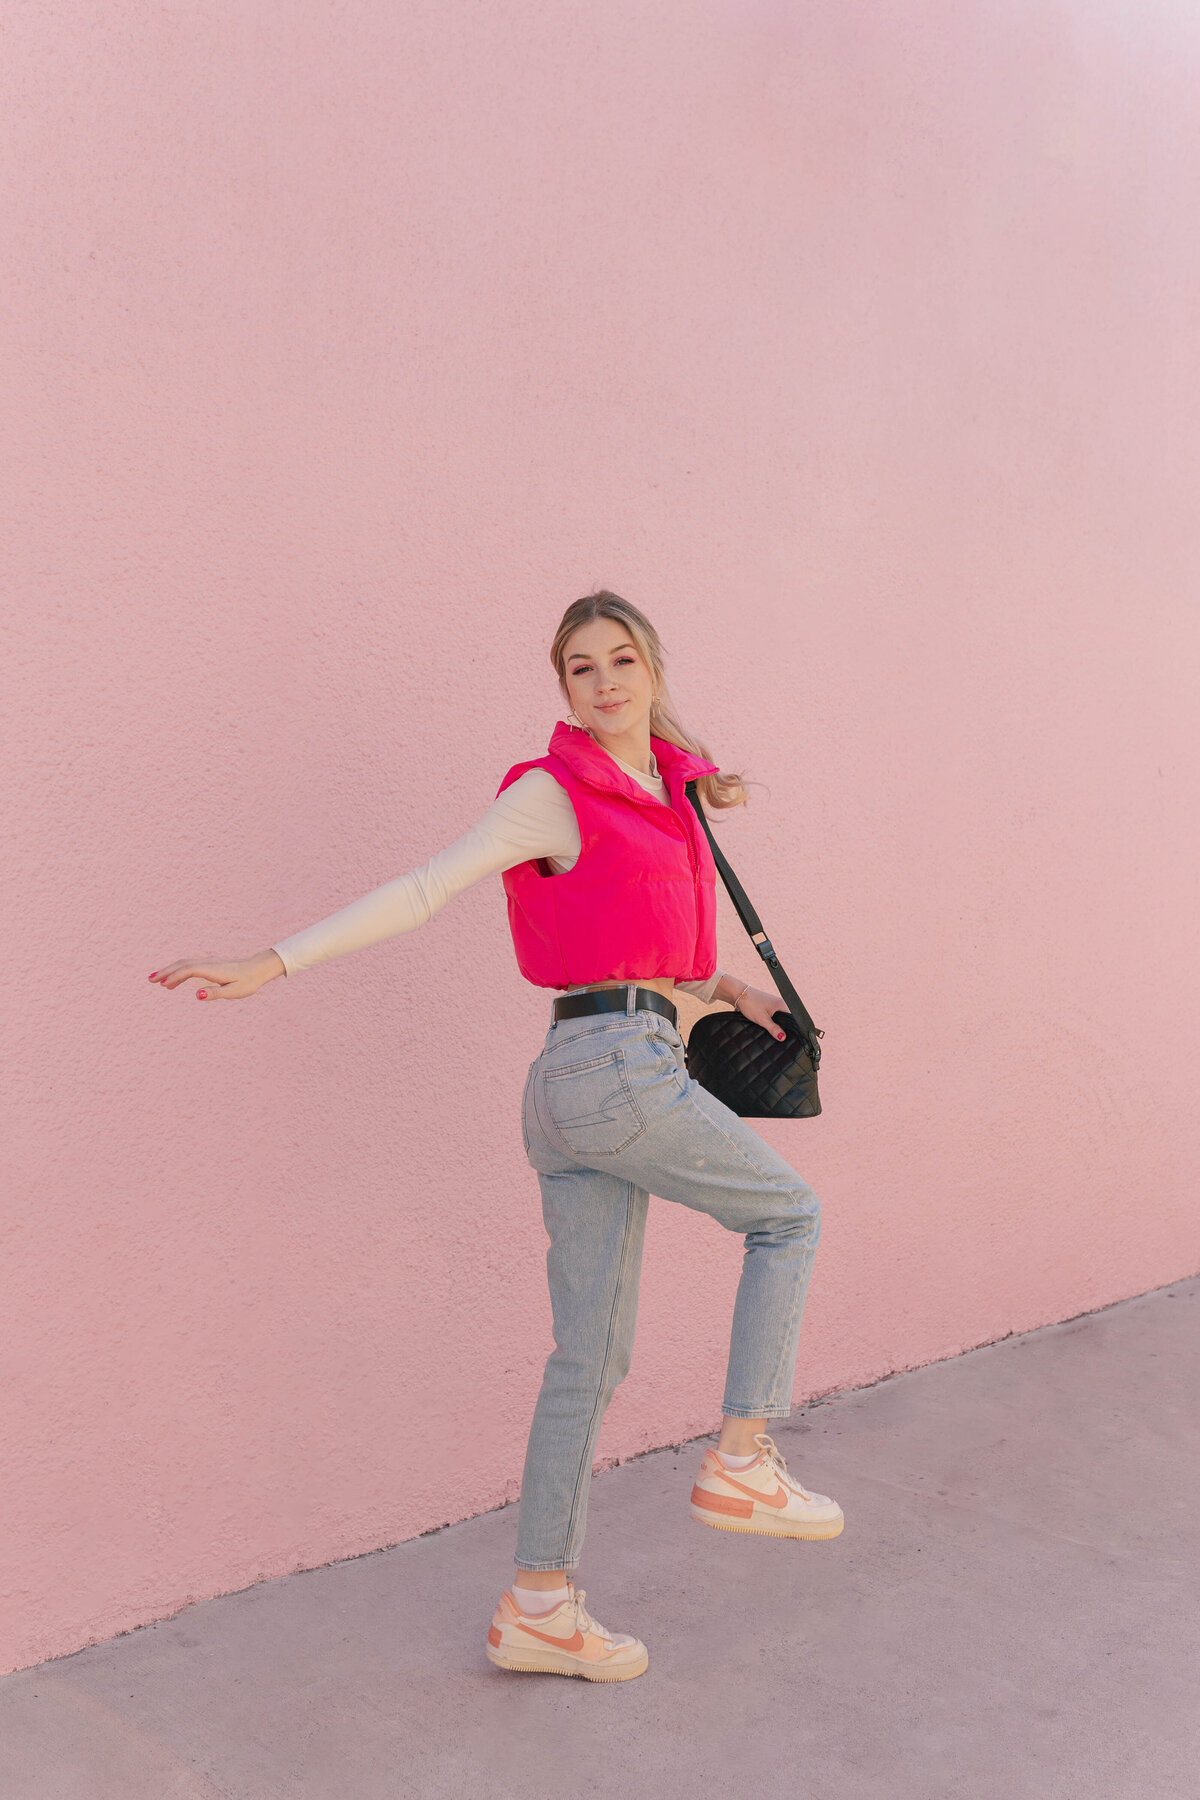 Sporty barbie strikes a pose in front of a pink wall in Houston